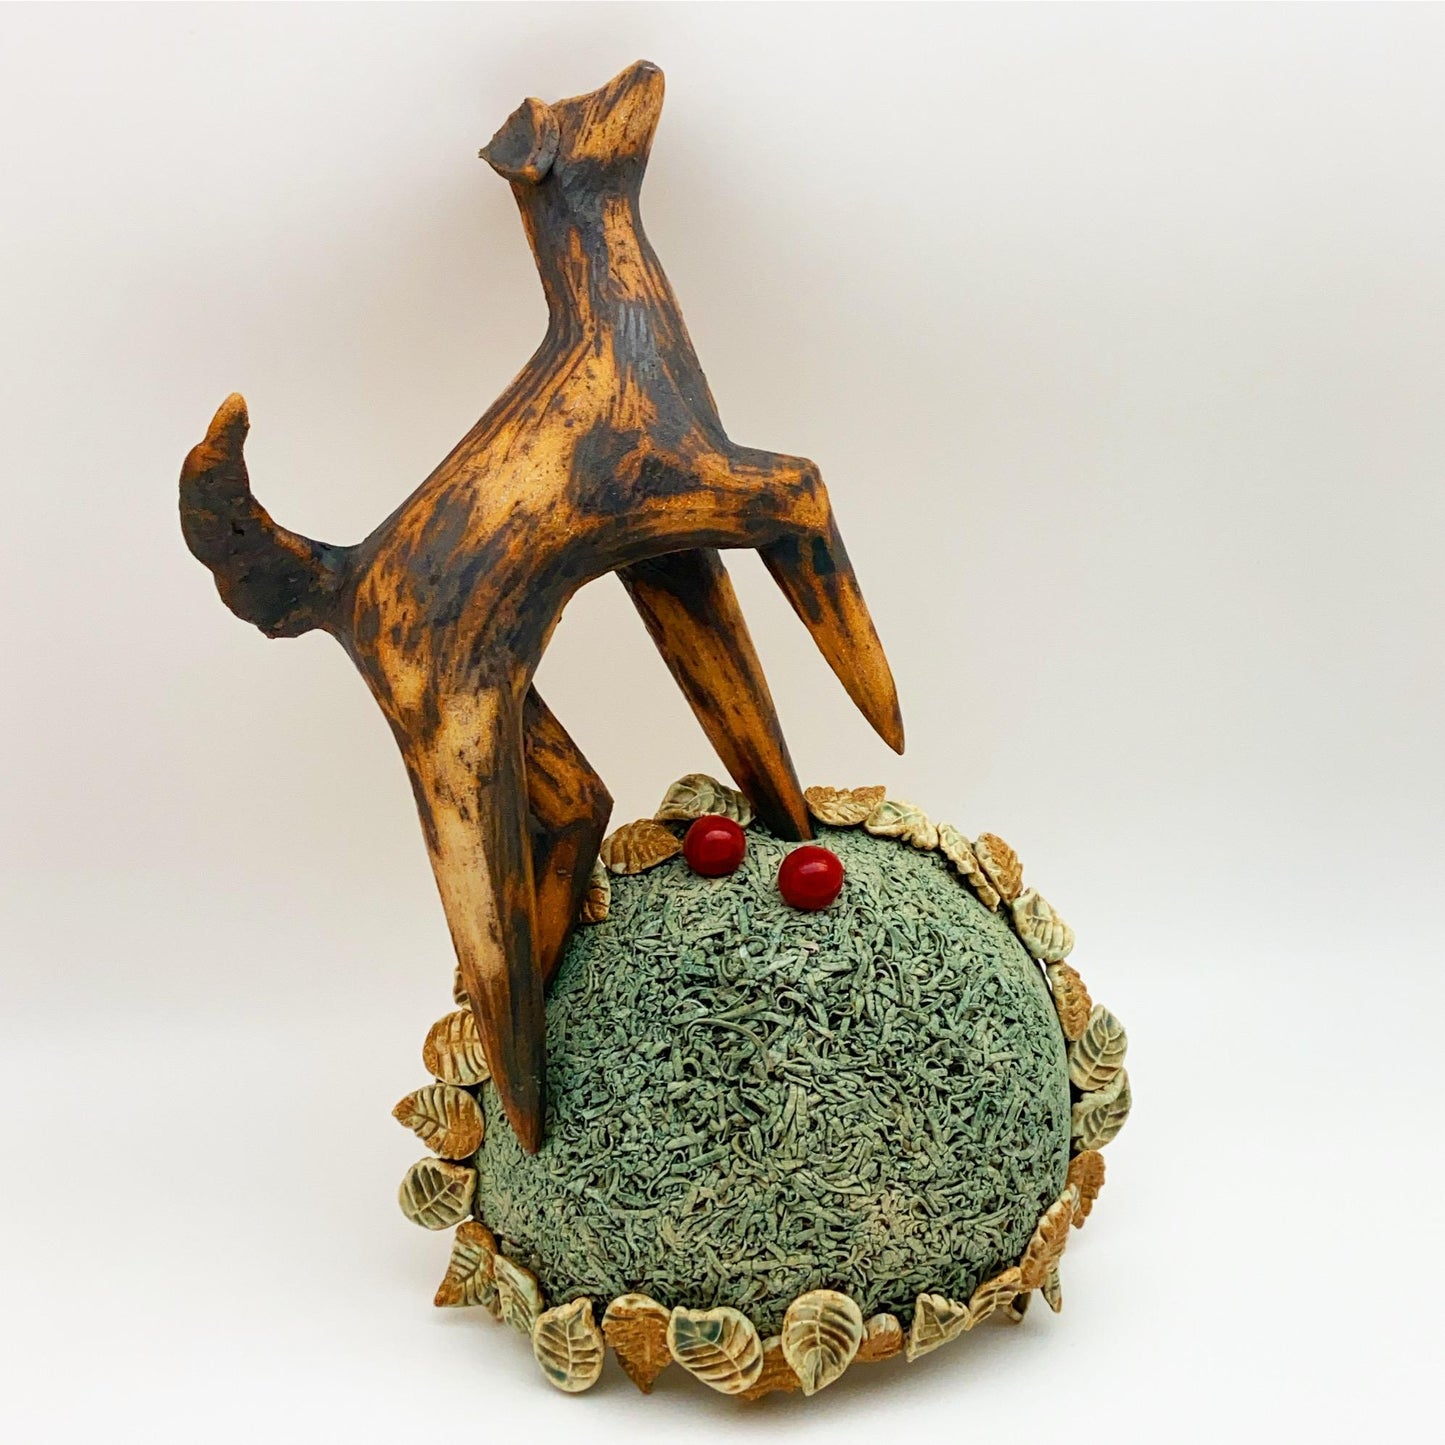 Sculpture - "King Of The Hill" - Ceramic